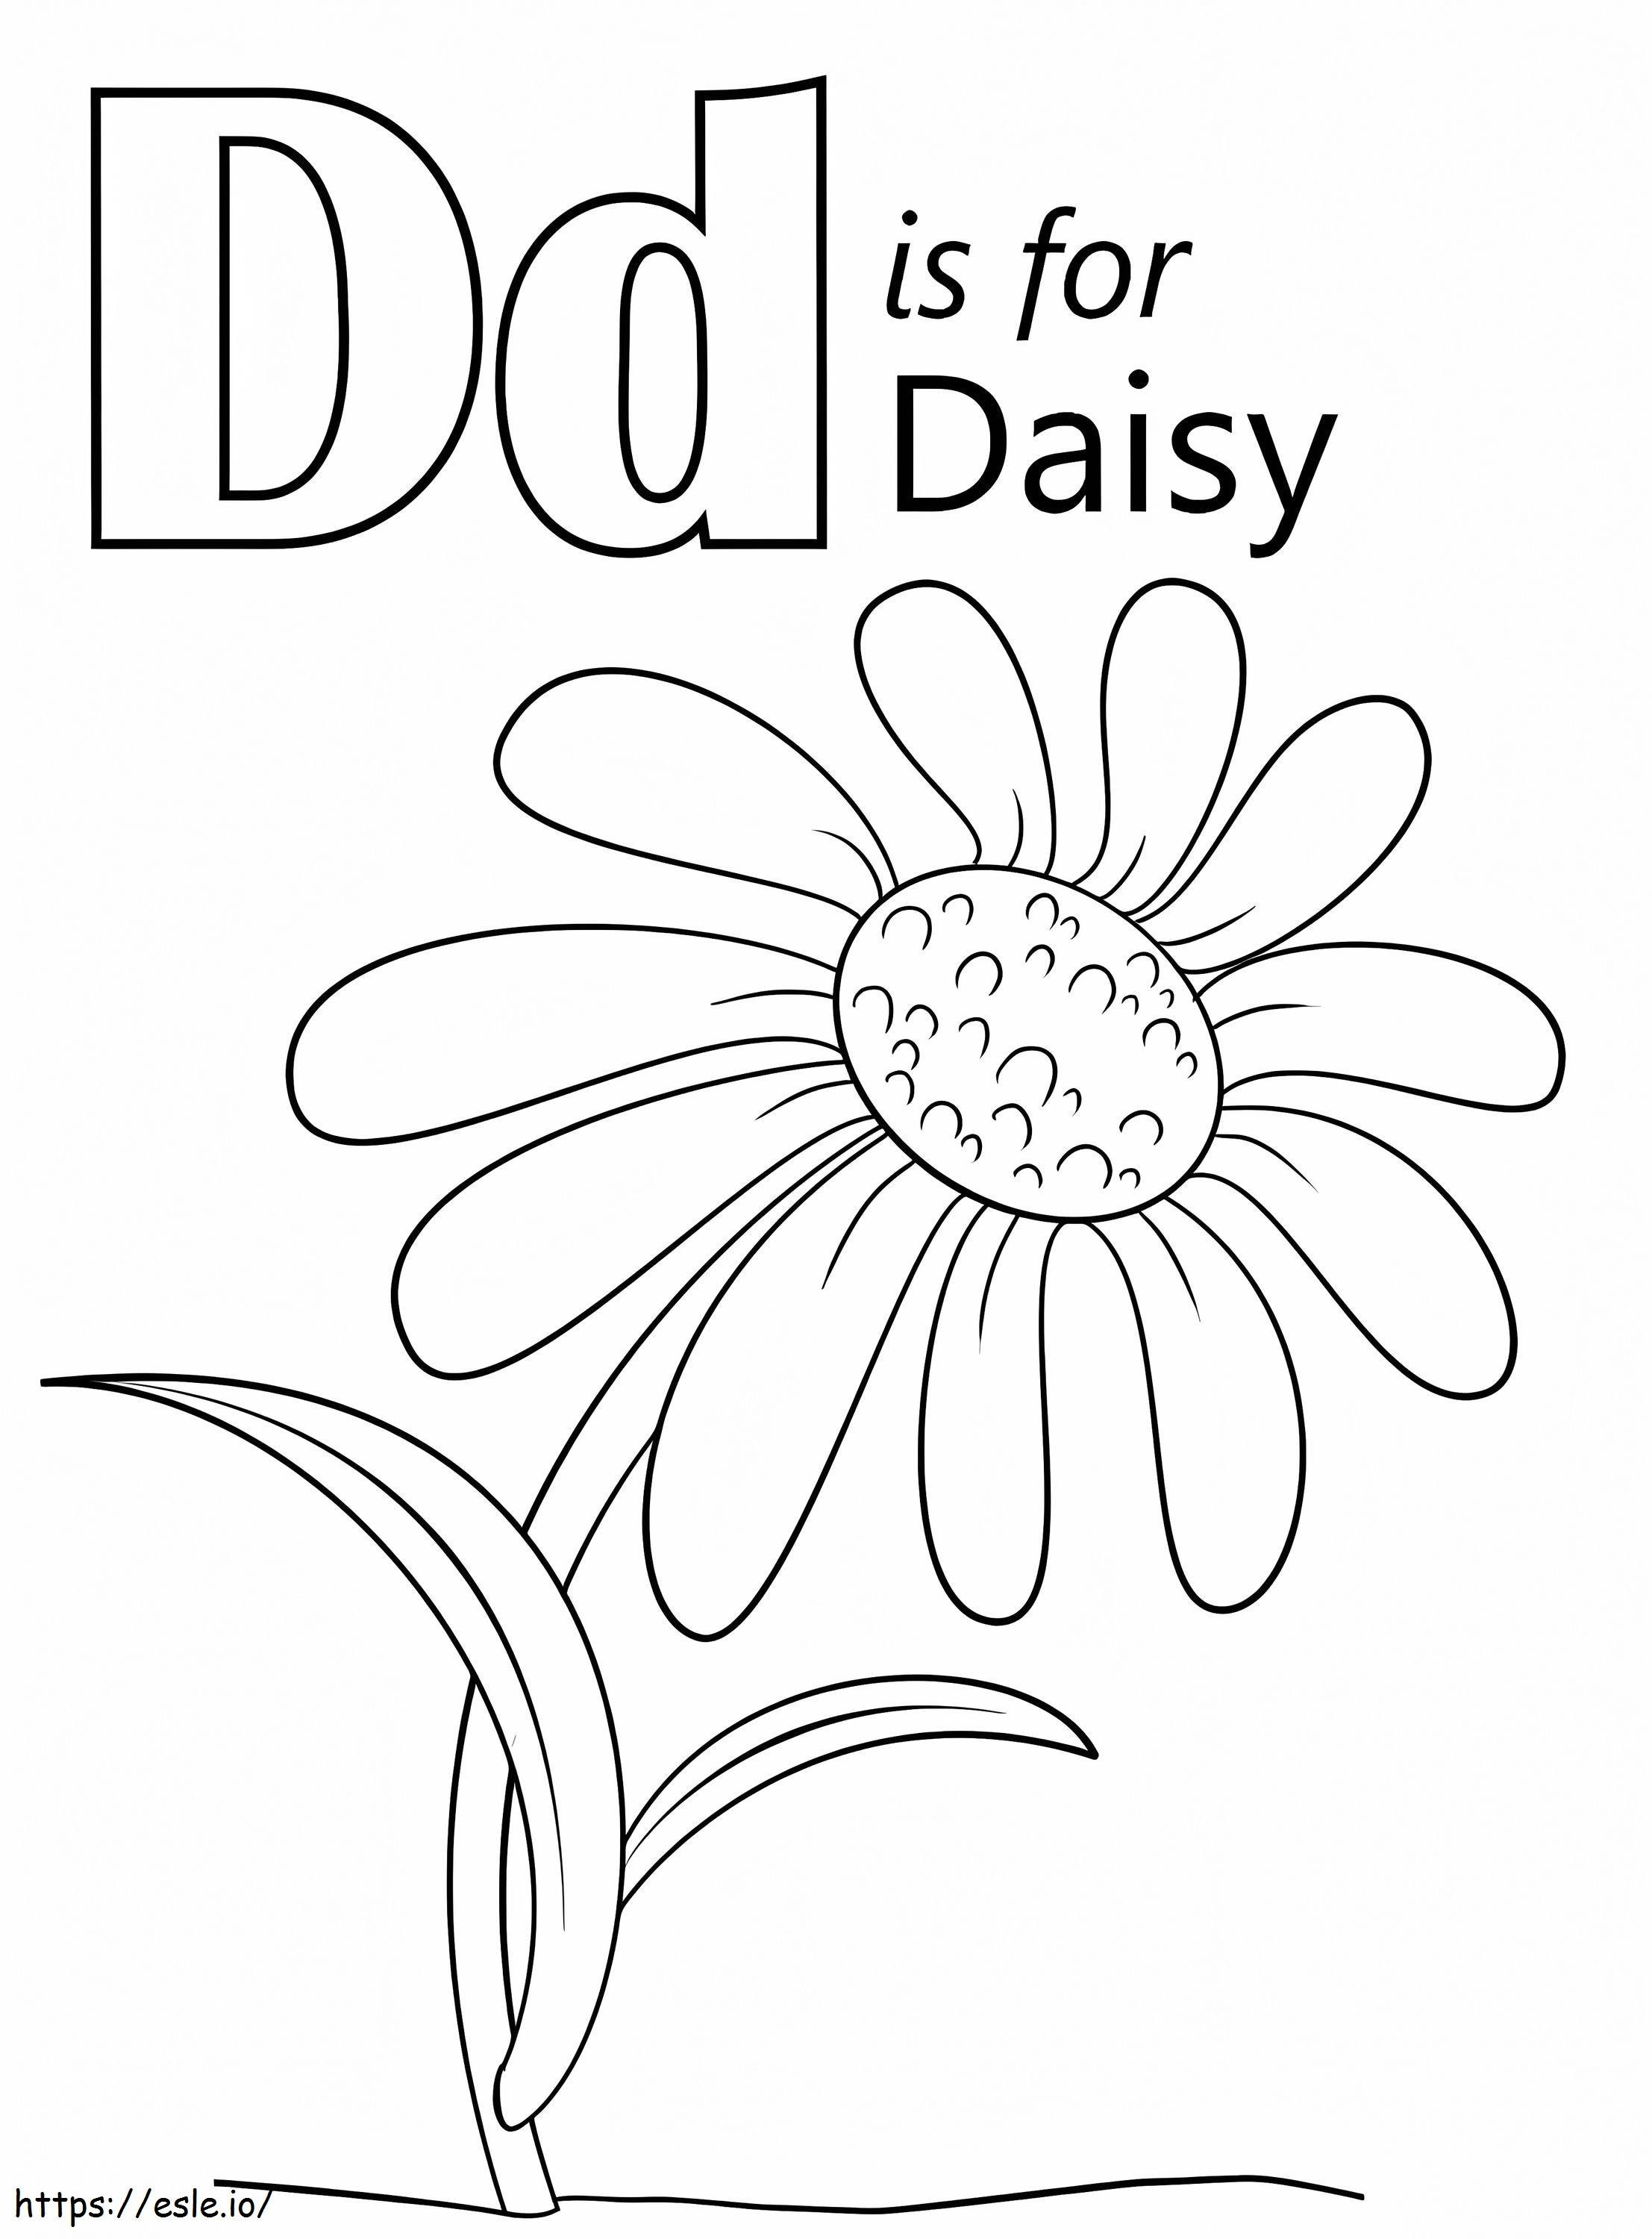 Daisy Letter D coloring page